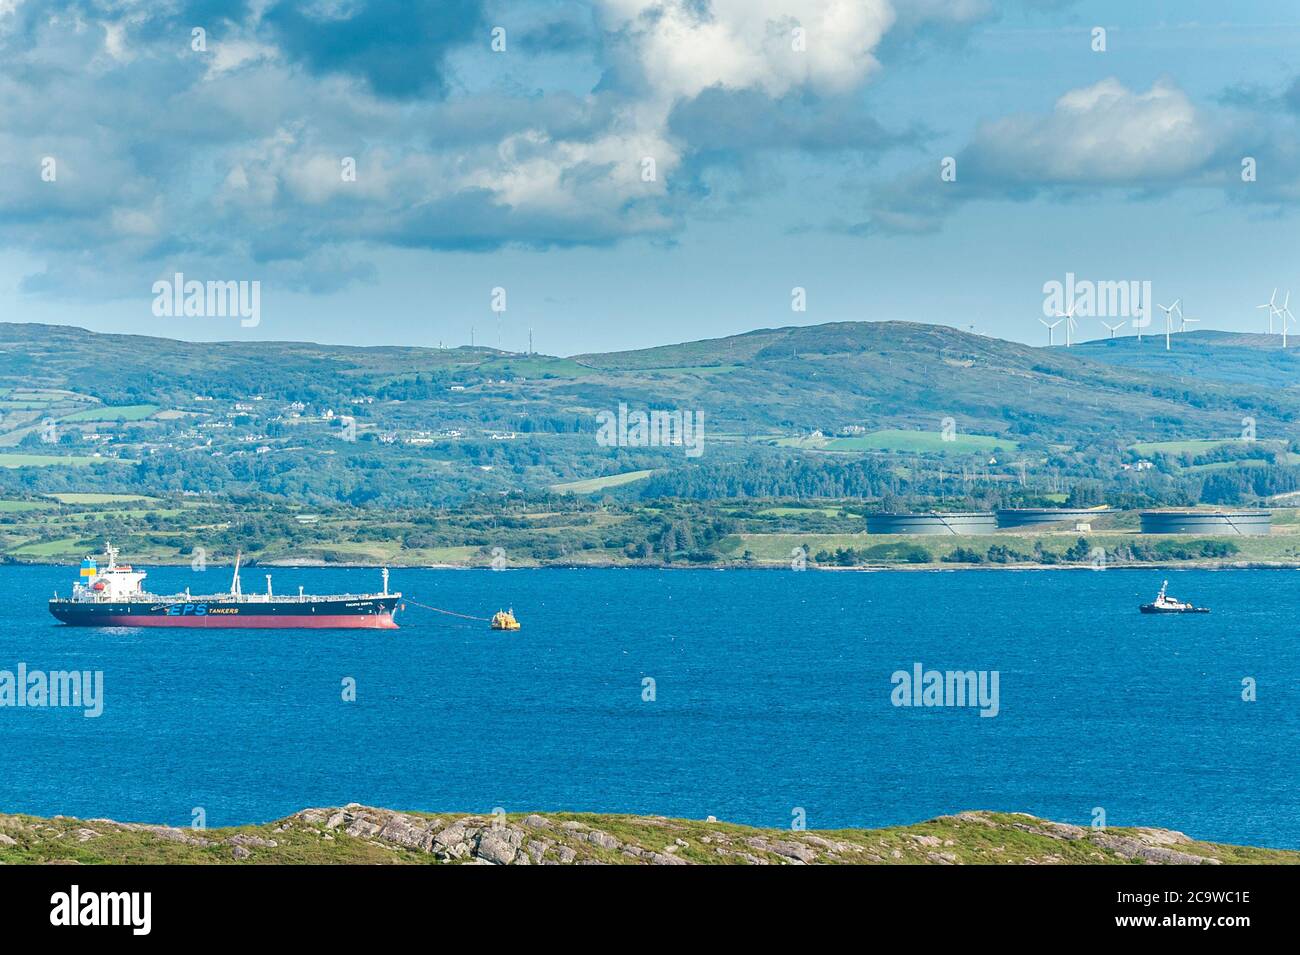 Bantry Bay, West Cork, Ireland. 2nd Aug, 2020. Crude oil tanker 'Pacific Beryl' offloads her cargo of oil at Whiddy Island Oil Terminal in Bantry Bay, West Cork.  Whiddy Island oil tanks can be seen in the background. Credit: AG News/Alamy Live News Stock Photo